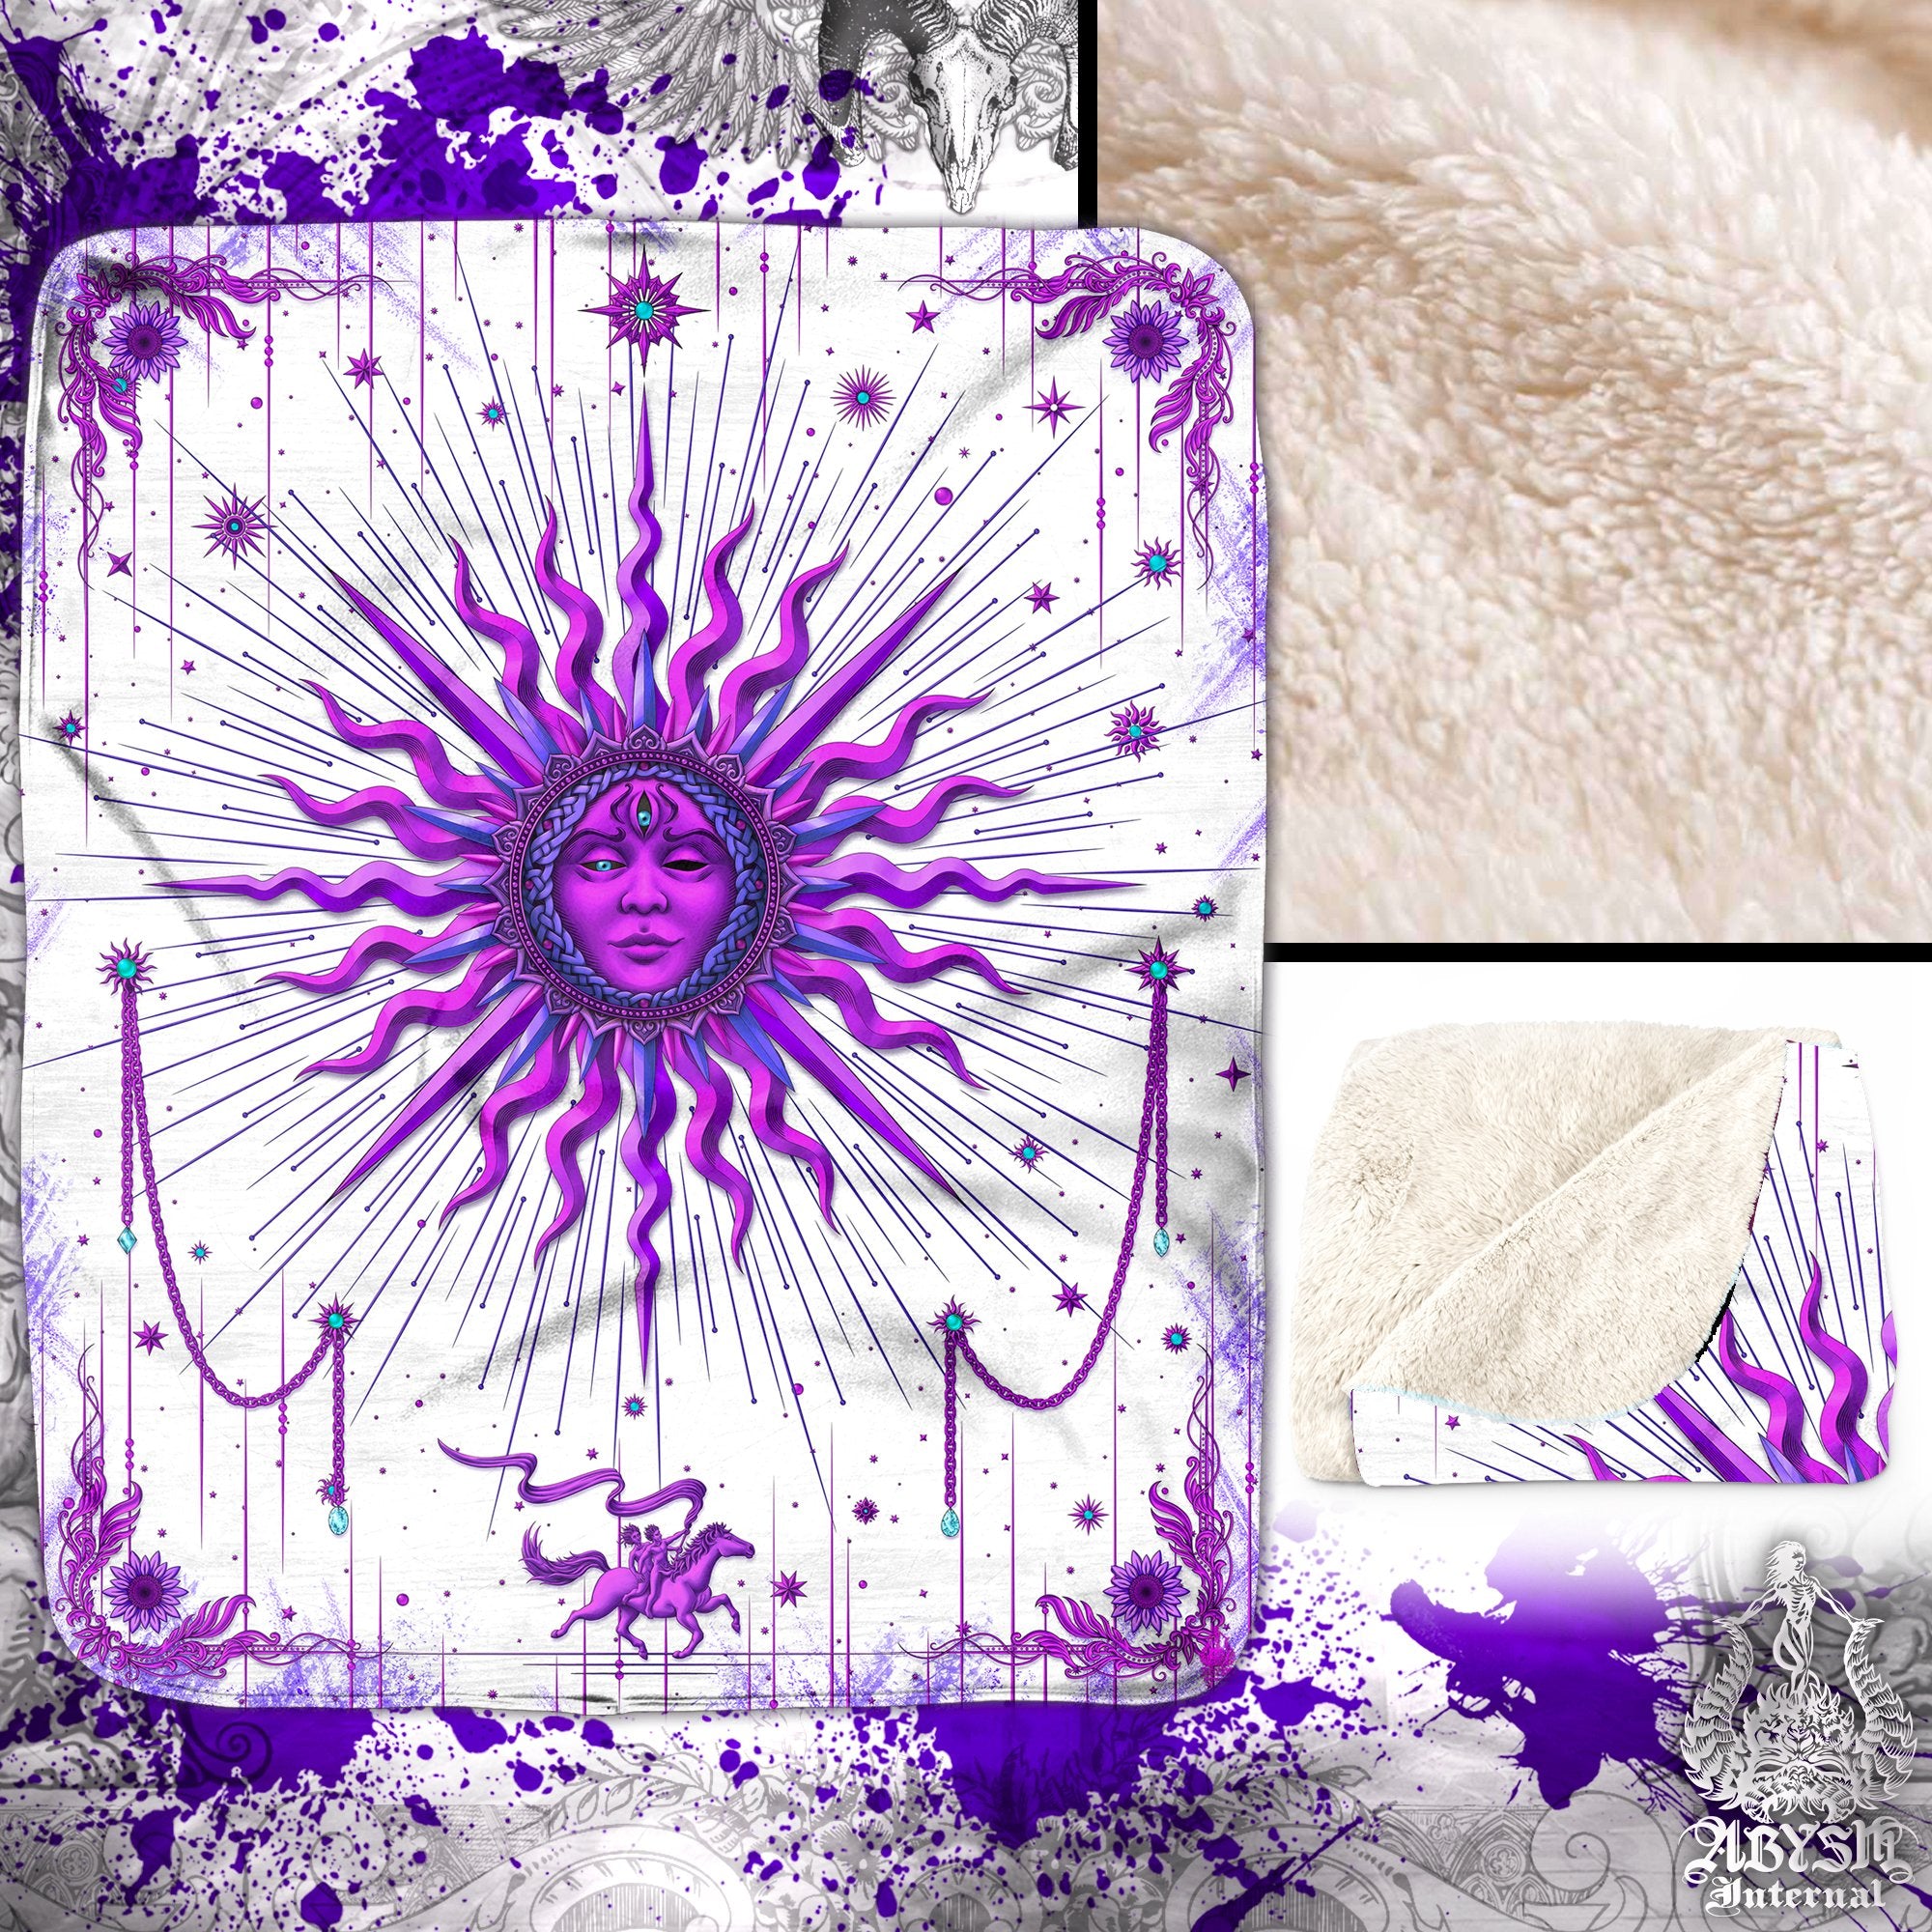 Witch Magic Sun Sherpa Fleece Throw Blanket, Tarot Arcana Art, Witchy Esoteric Room, White Goth Home Decor, Fortune Gift - Purple - Abysm Internal